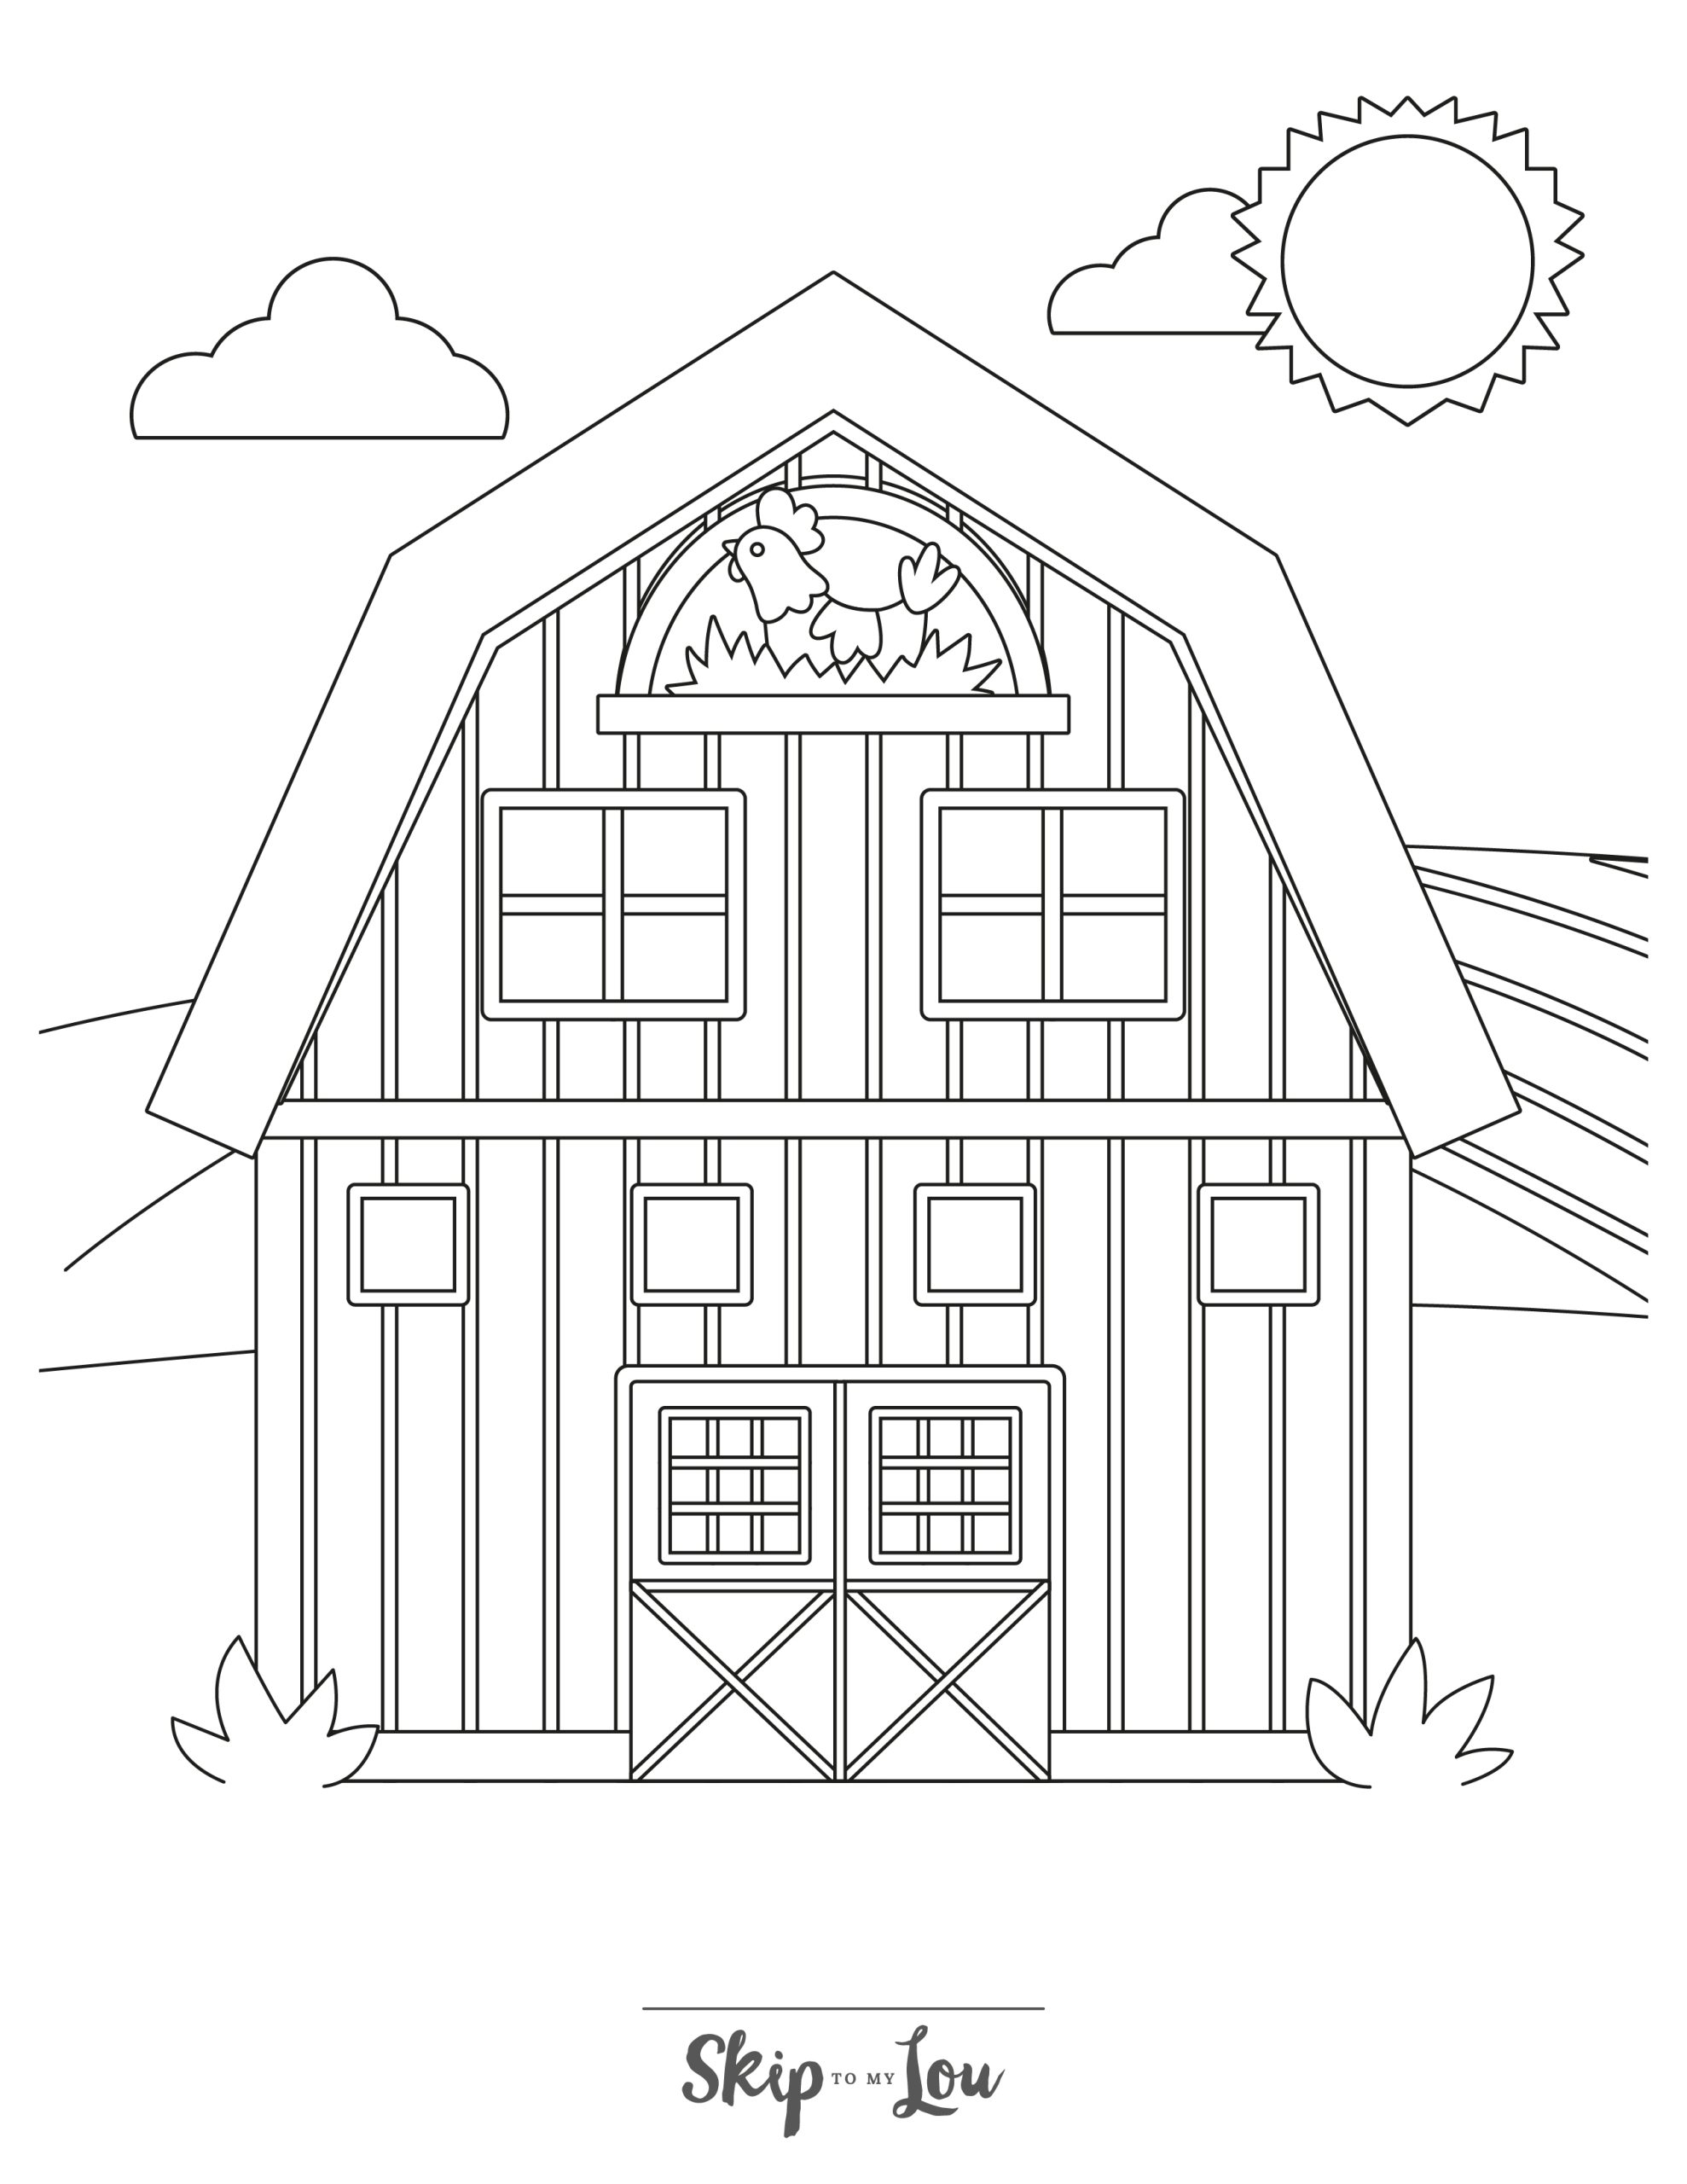 Farm Coloring Page 7 - A line drawing of a big barn with a chicken in the top window. Fields are in the background.